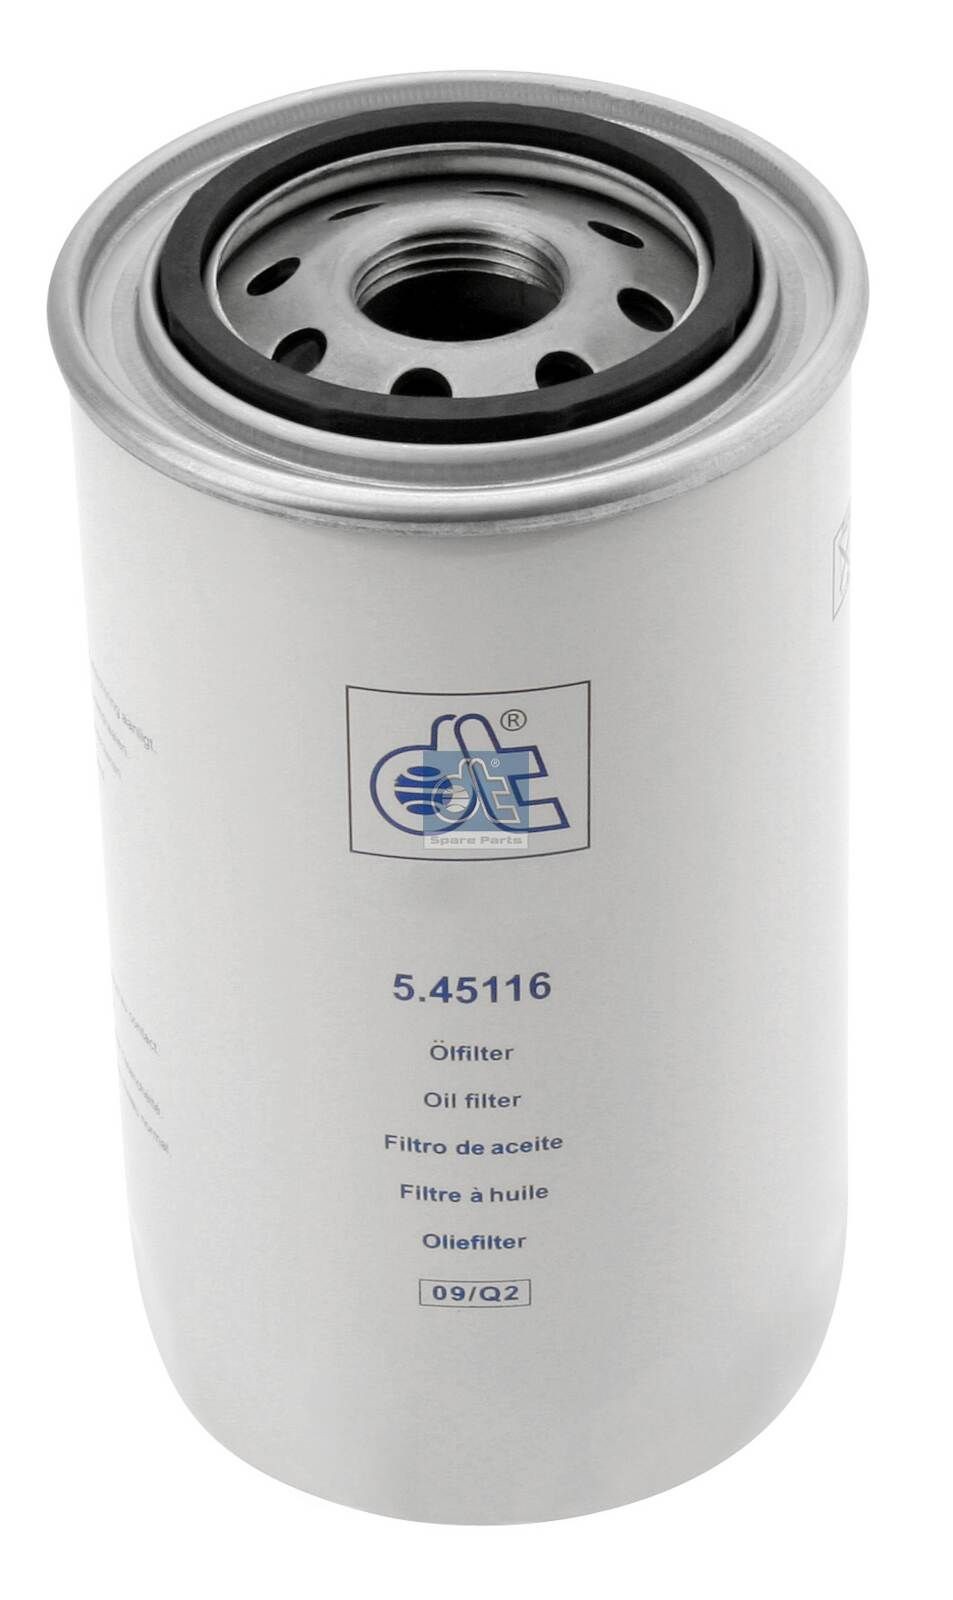 H19W10 DT Spare Parts 5.45116 Oil filter 1706238